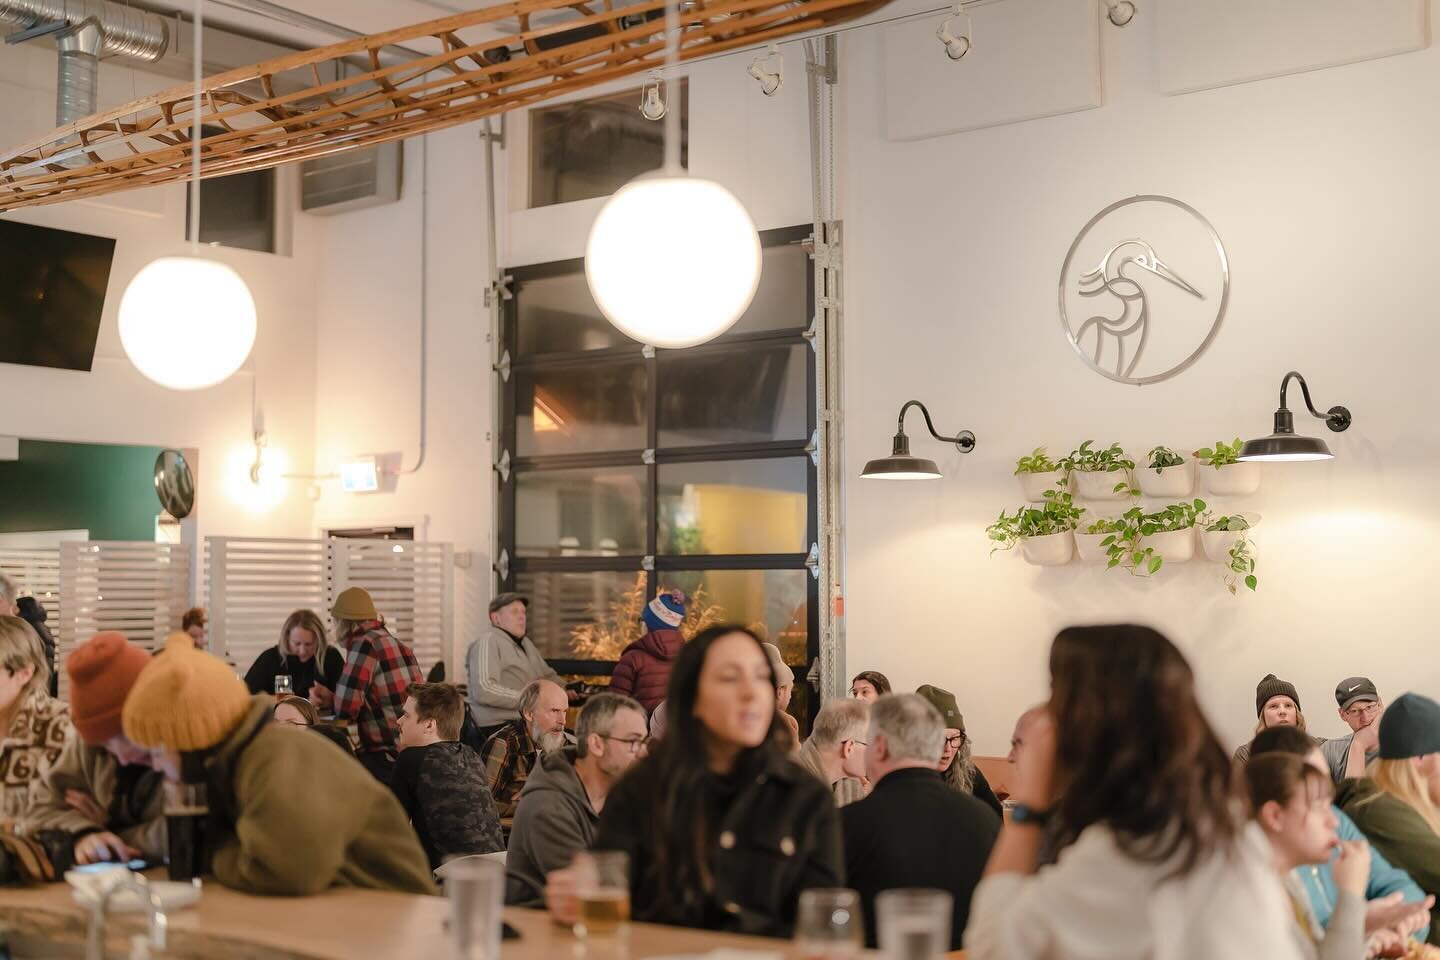 Cozy evening vibes are the greatest. Get on down here - 
Fresh beer &amp; delicious eats are waiting for you&hellip;
.
#comoxbeer #landandseabeer #freshbeer